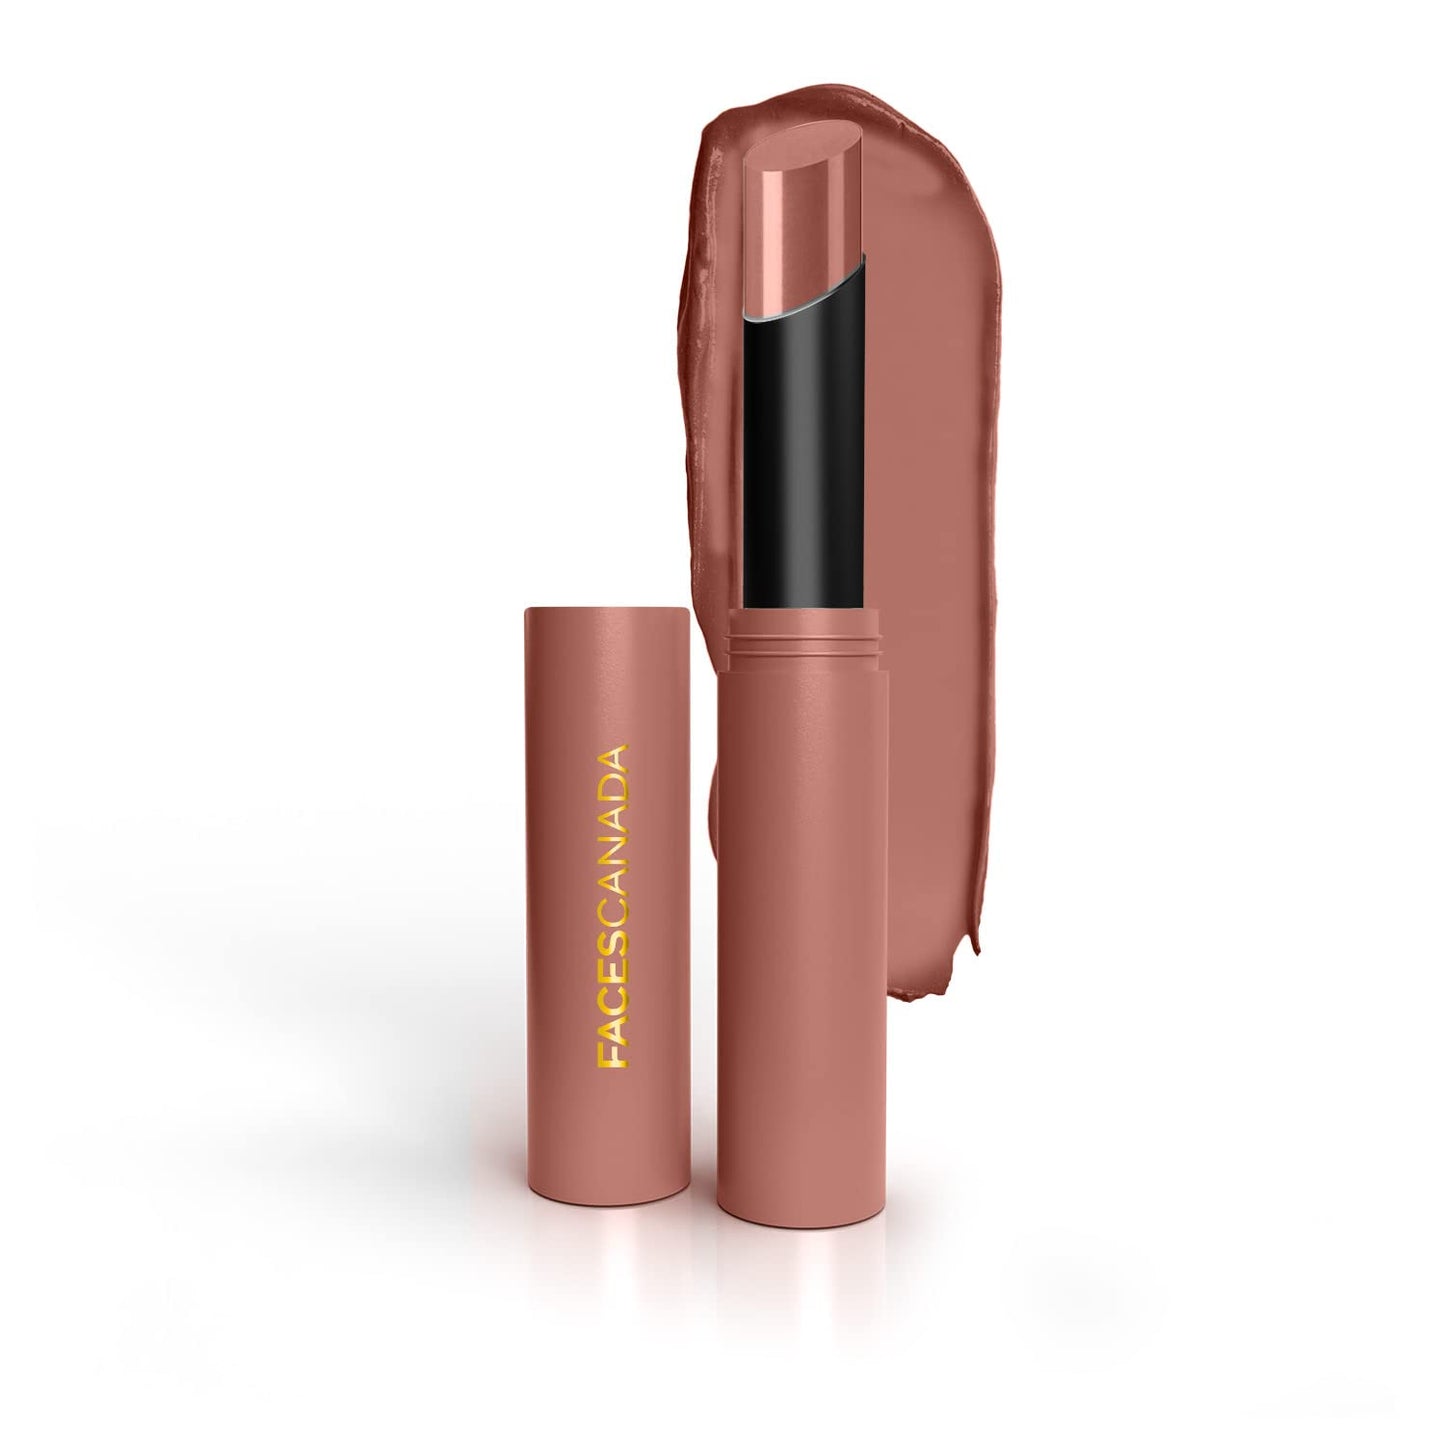 FACESCANADA Long Stay 3-in-1 Matte Lipstick - Bubblegum Pink 04, 2g | 8HR Longstay | Transfer Proof | Moisturizing | Chamomile & Shea Butter | Primer-Infused | Lightweight | Intense Color Payoff Matte lipstick from Faces Canada